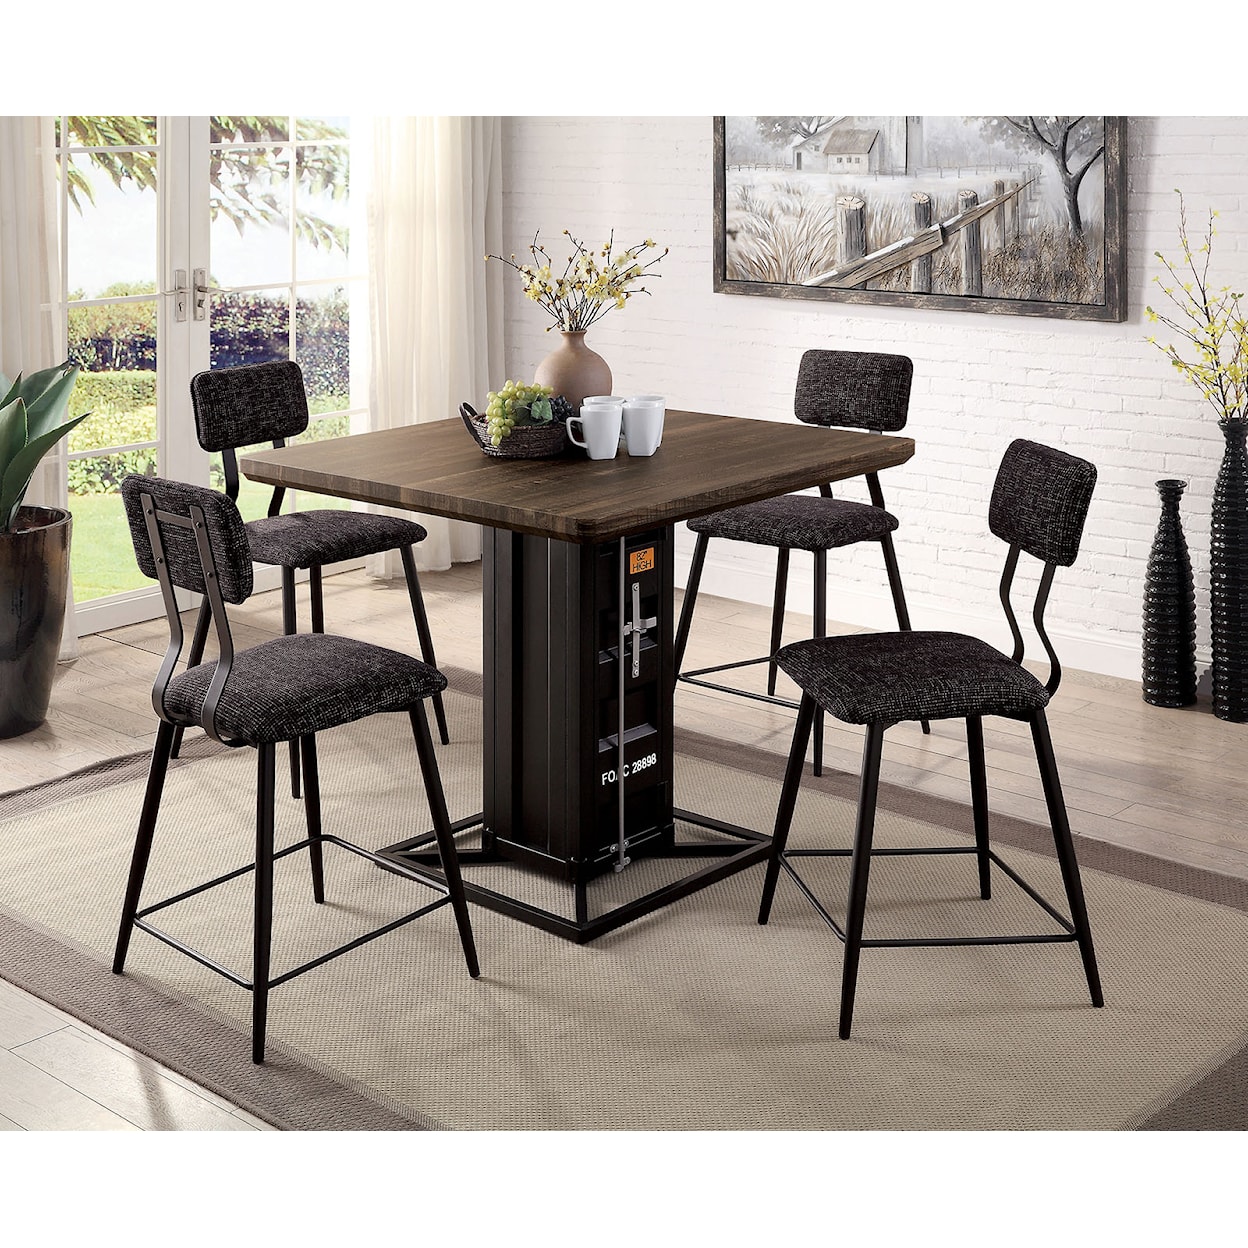 Furniture of America Esdargo 5-Piece Counter Height Table Set